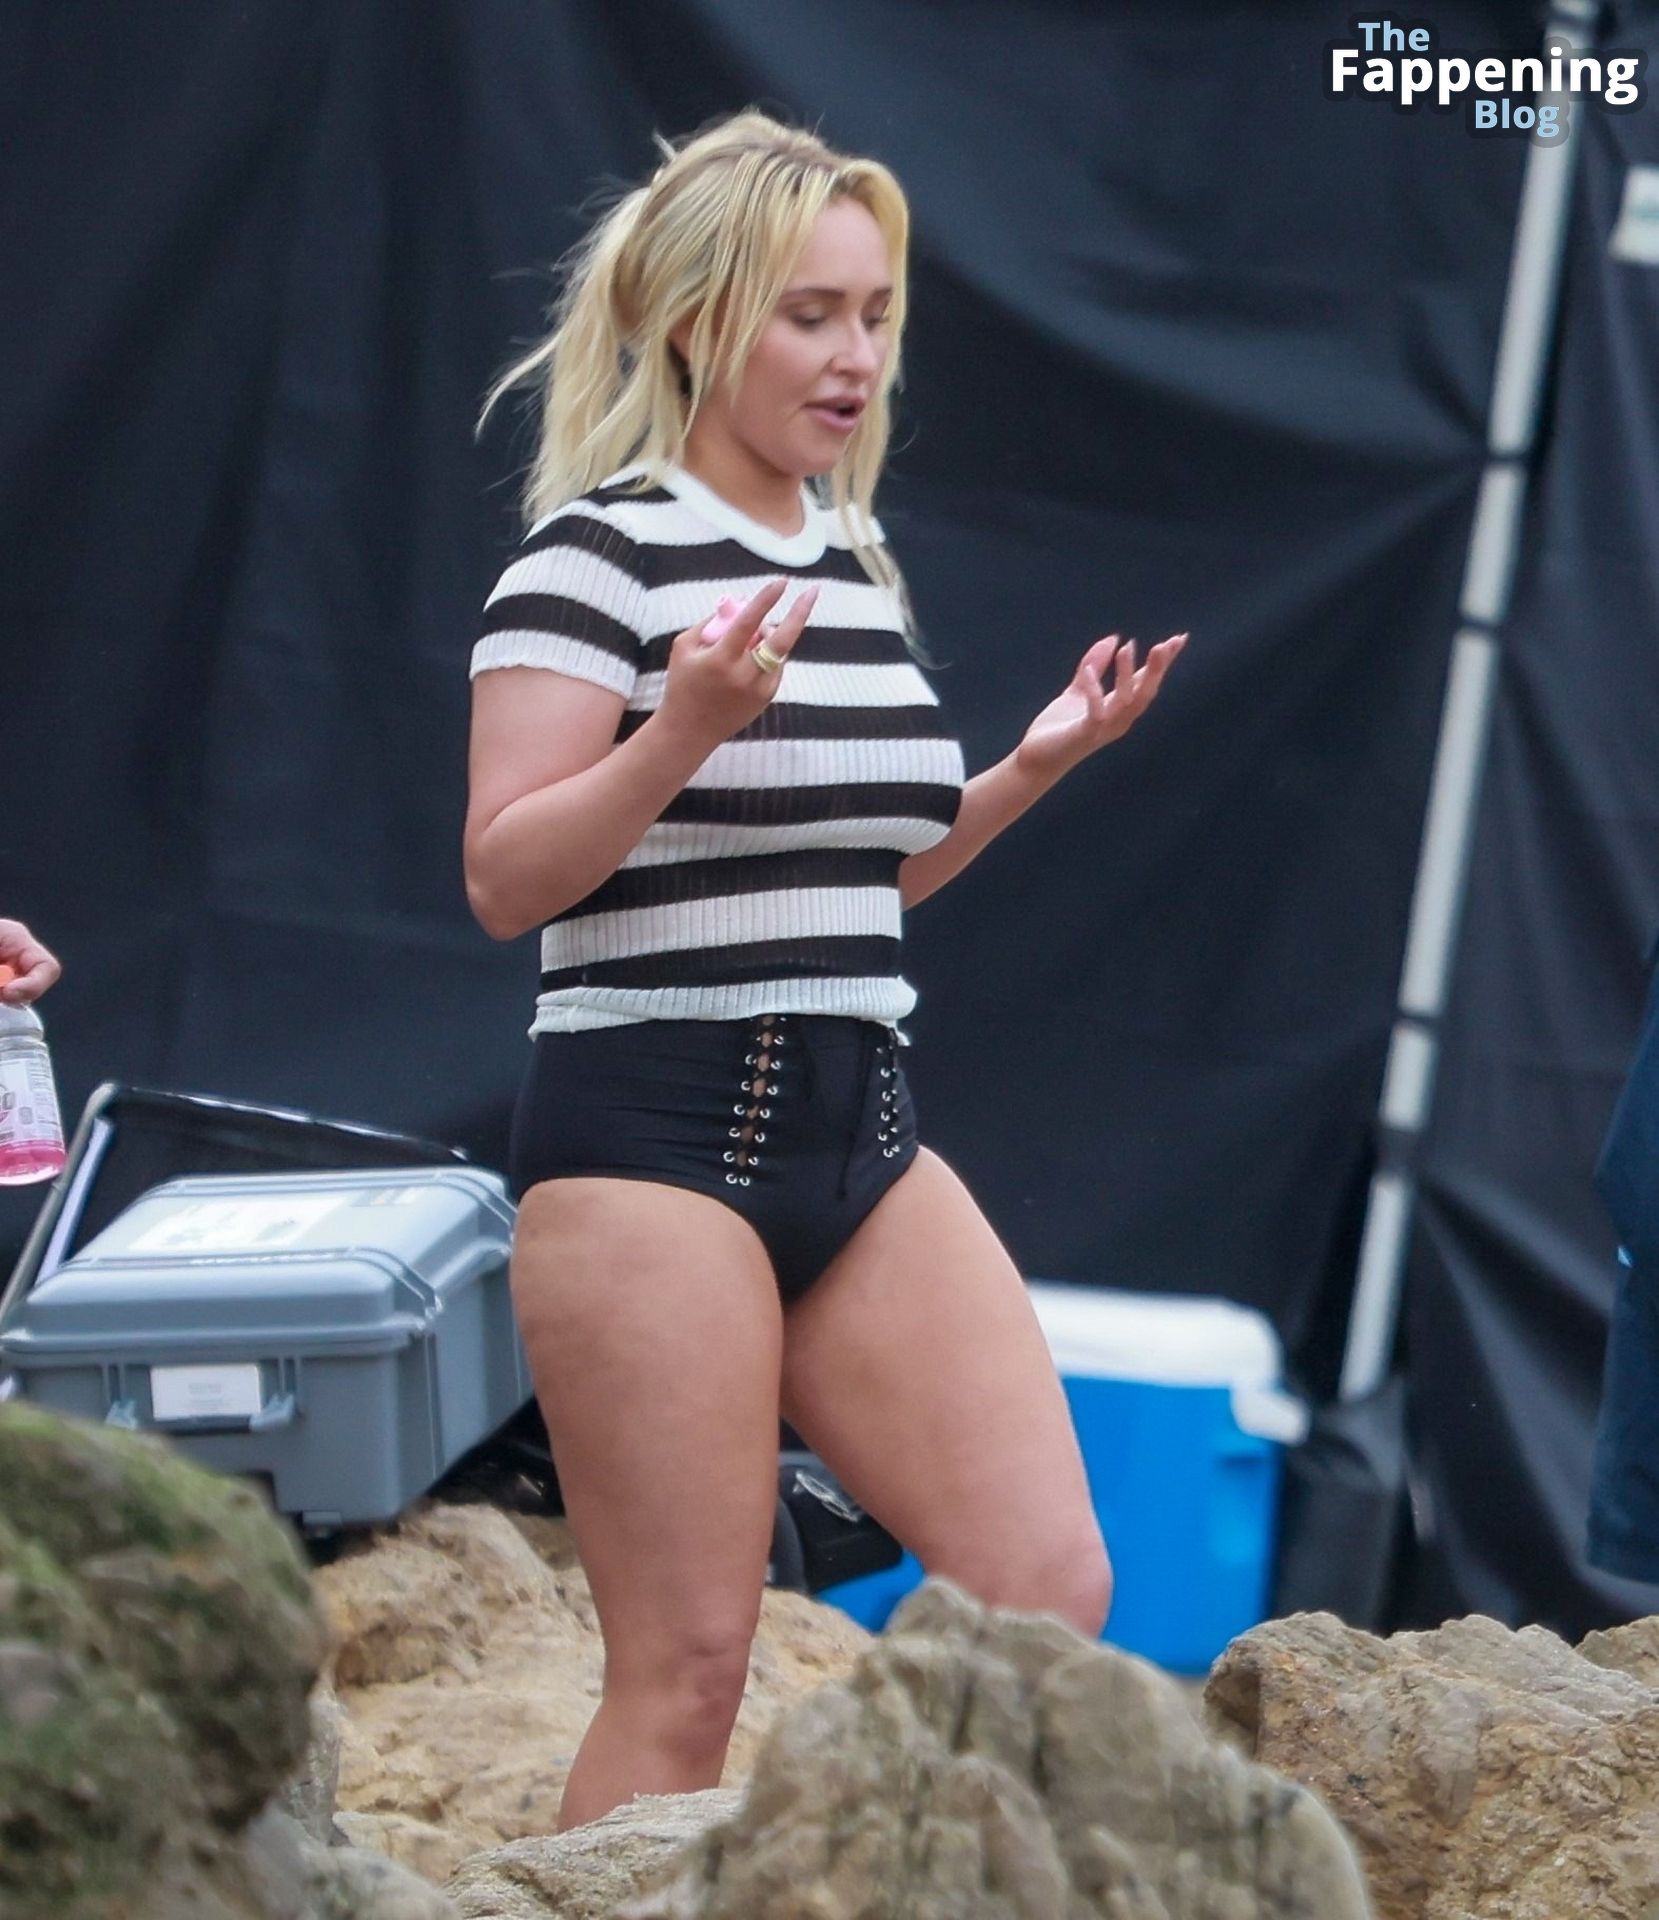 Hayden-Panettiere-Sexy-The-Fappening-Blog-33.jpg